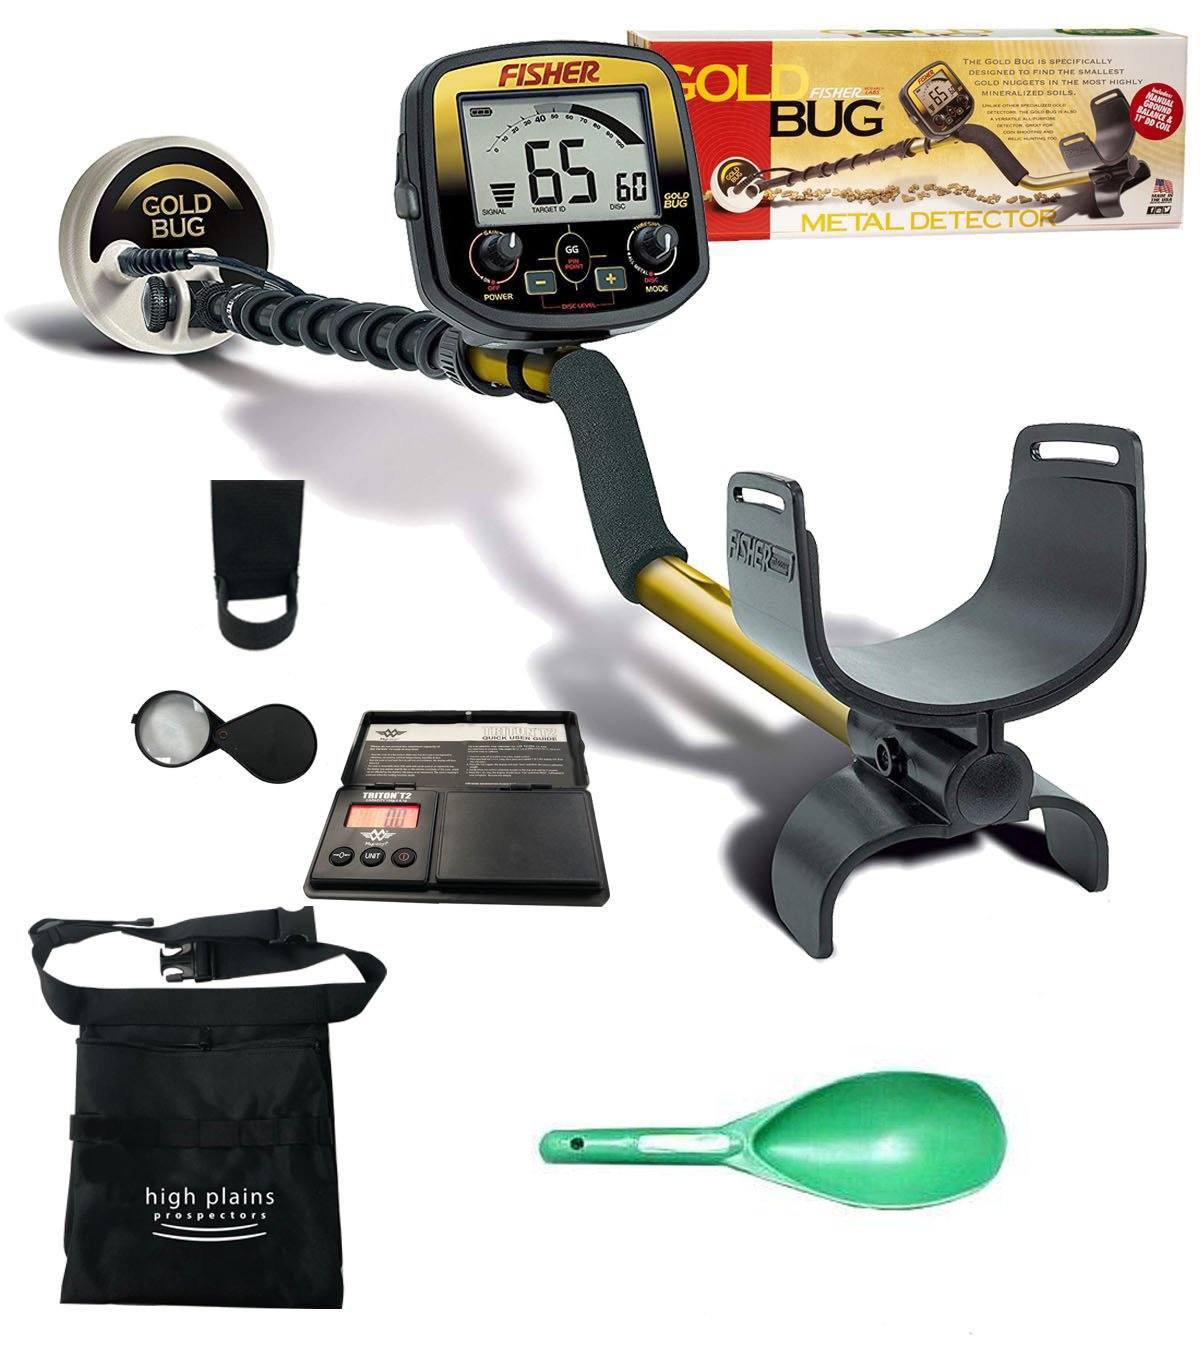 Fisher Gold Bug Metal Detector Bundle with Free Gear